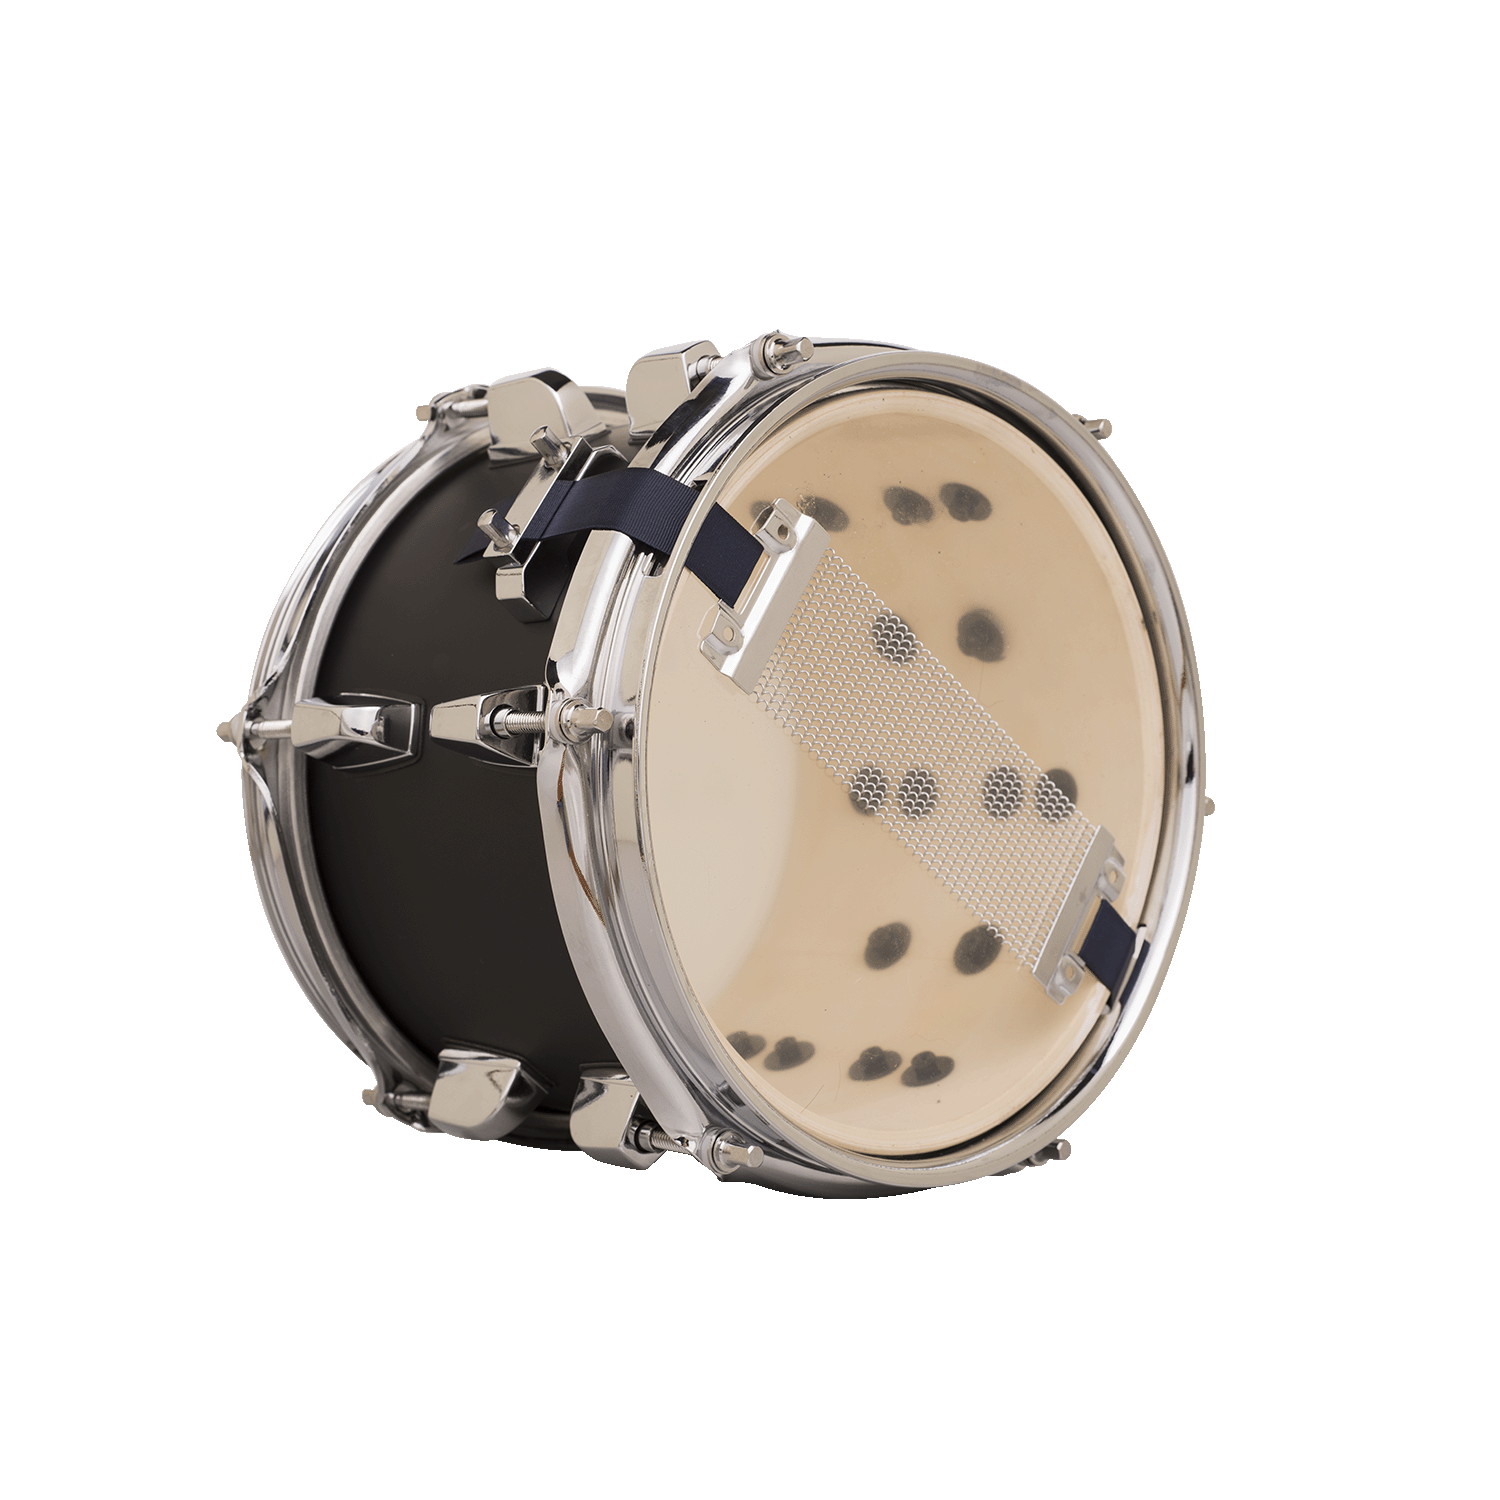 SNARE  MICHAEL POWERGATE STAGE PGS0806 JBK 08x06